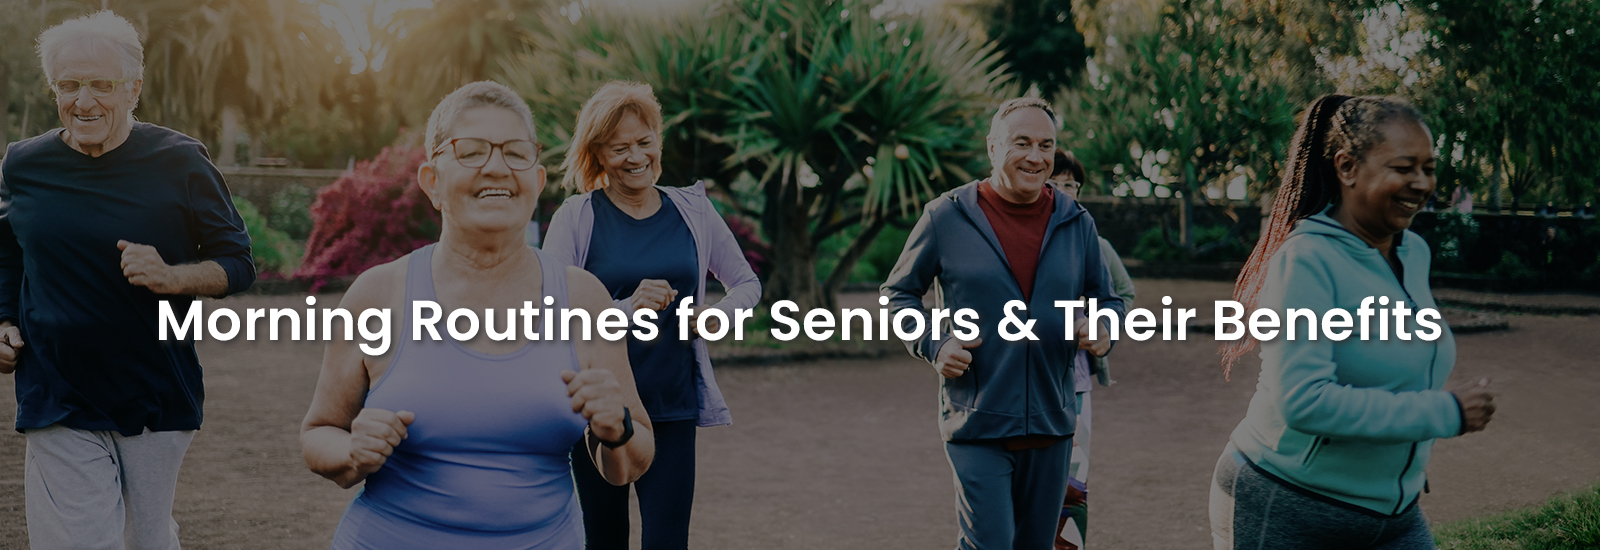 Morning Routines for Seniors & Their Benefits | Banner Image